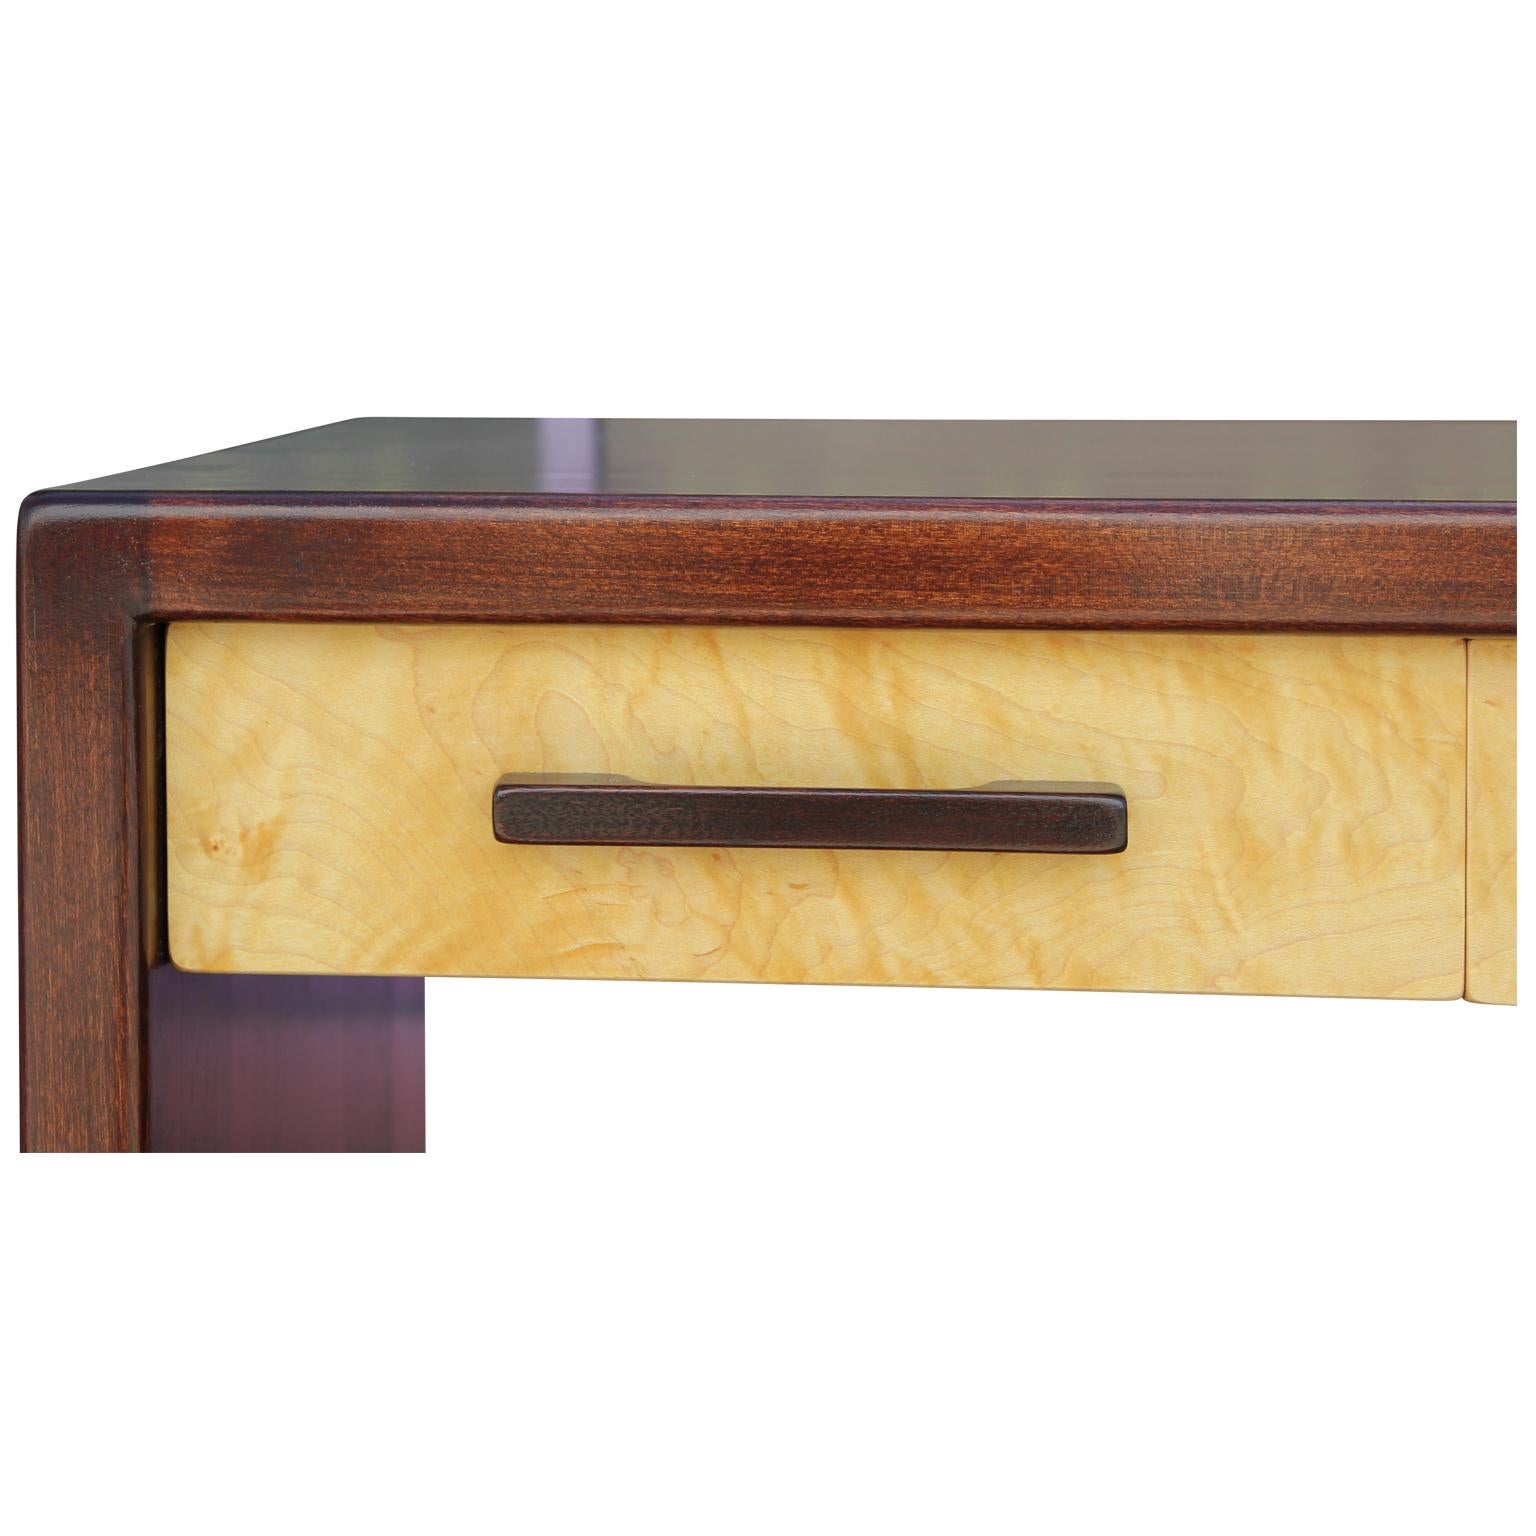 Wonderful high quality custom made 3 drawer desk by Norm Stoeker in Houston Texas. This desk or entry table has been thoughtfully crafted out of three kinds of wood. The outer shell features hand cut dove tail joinery. Three drawer fronts are made